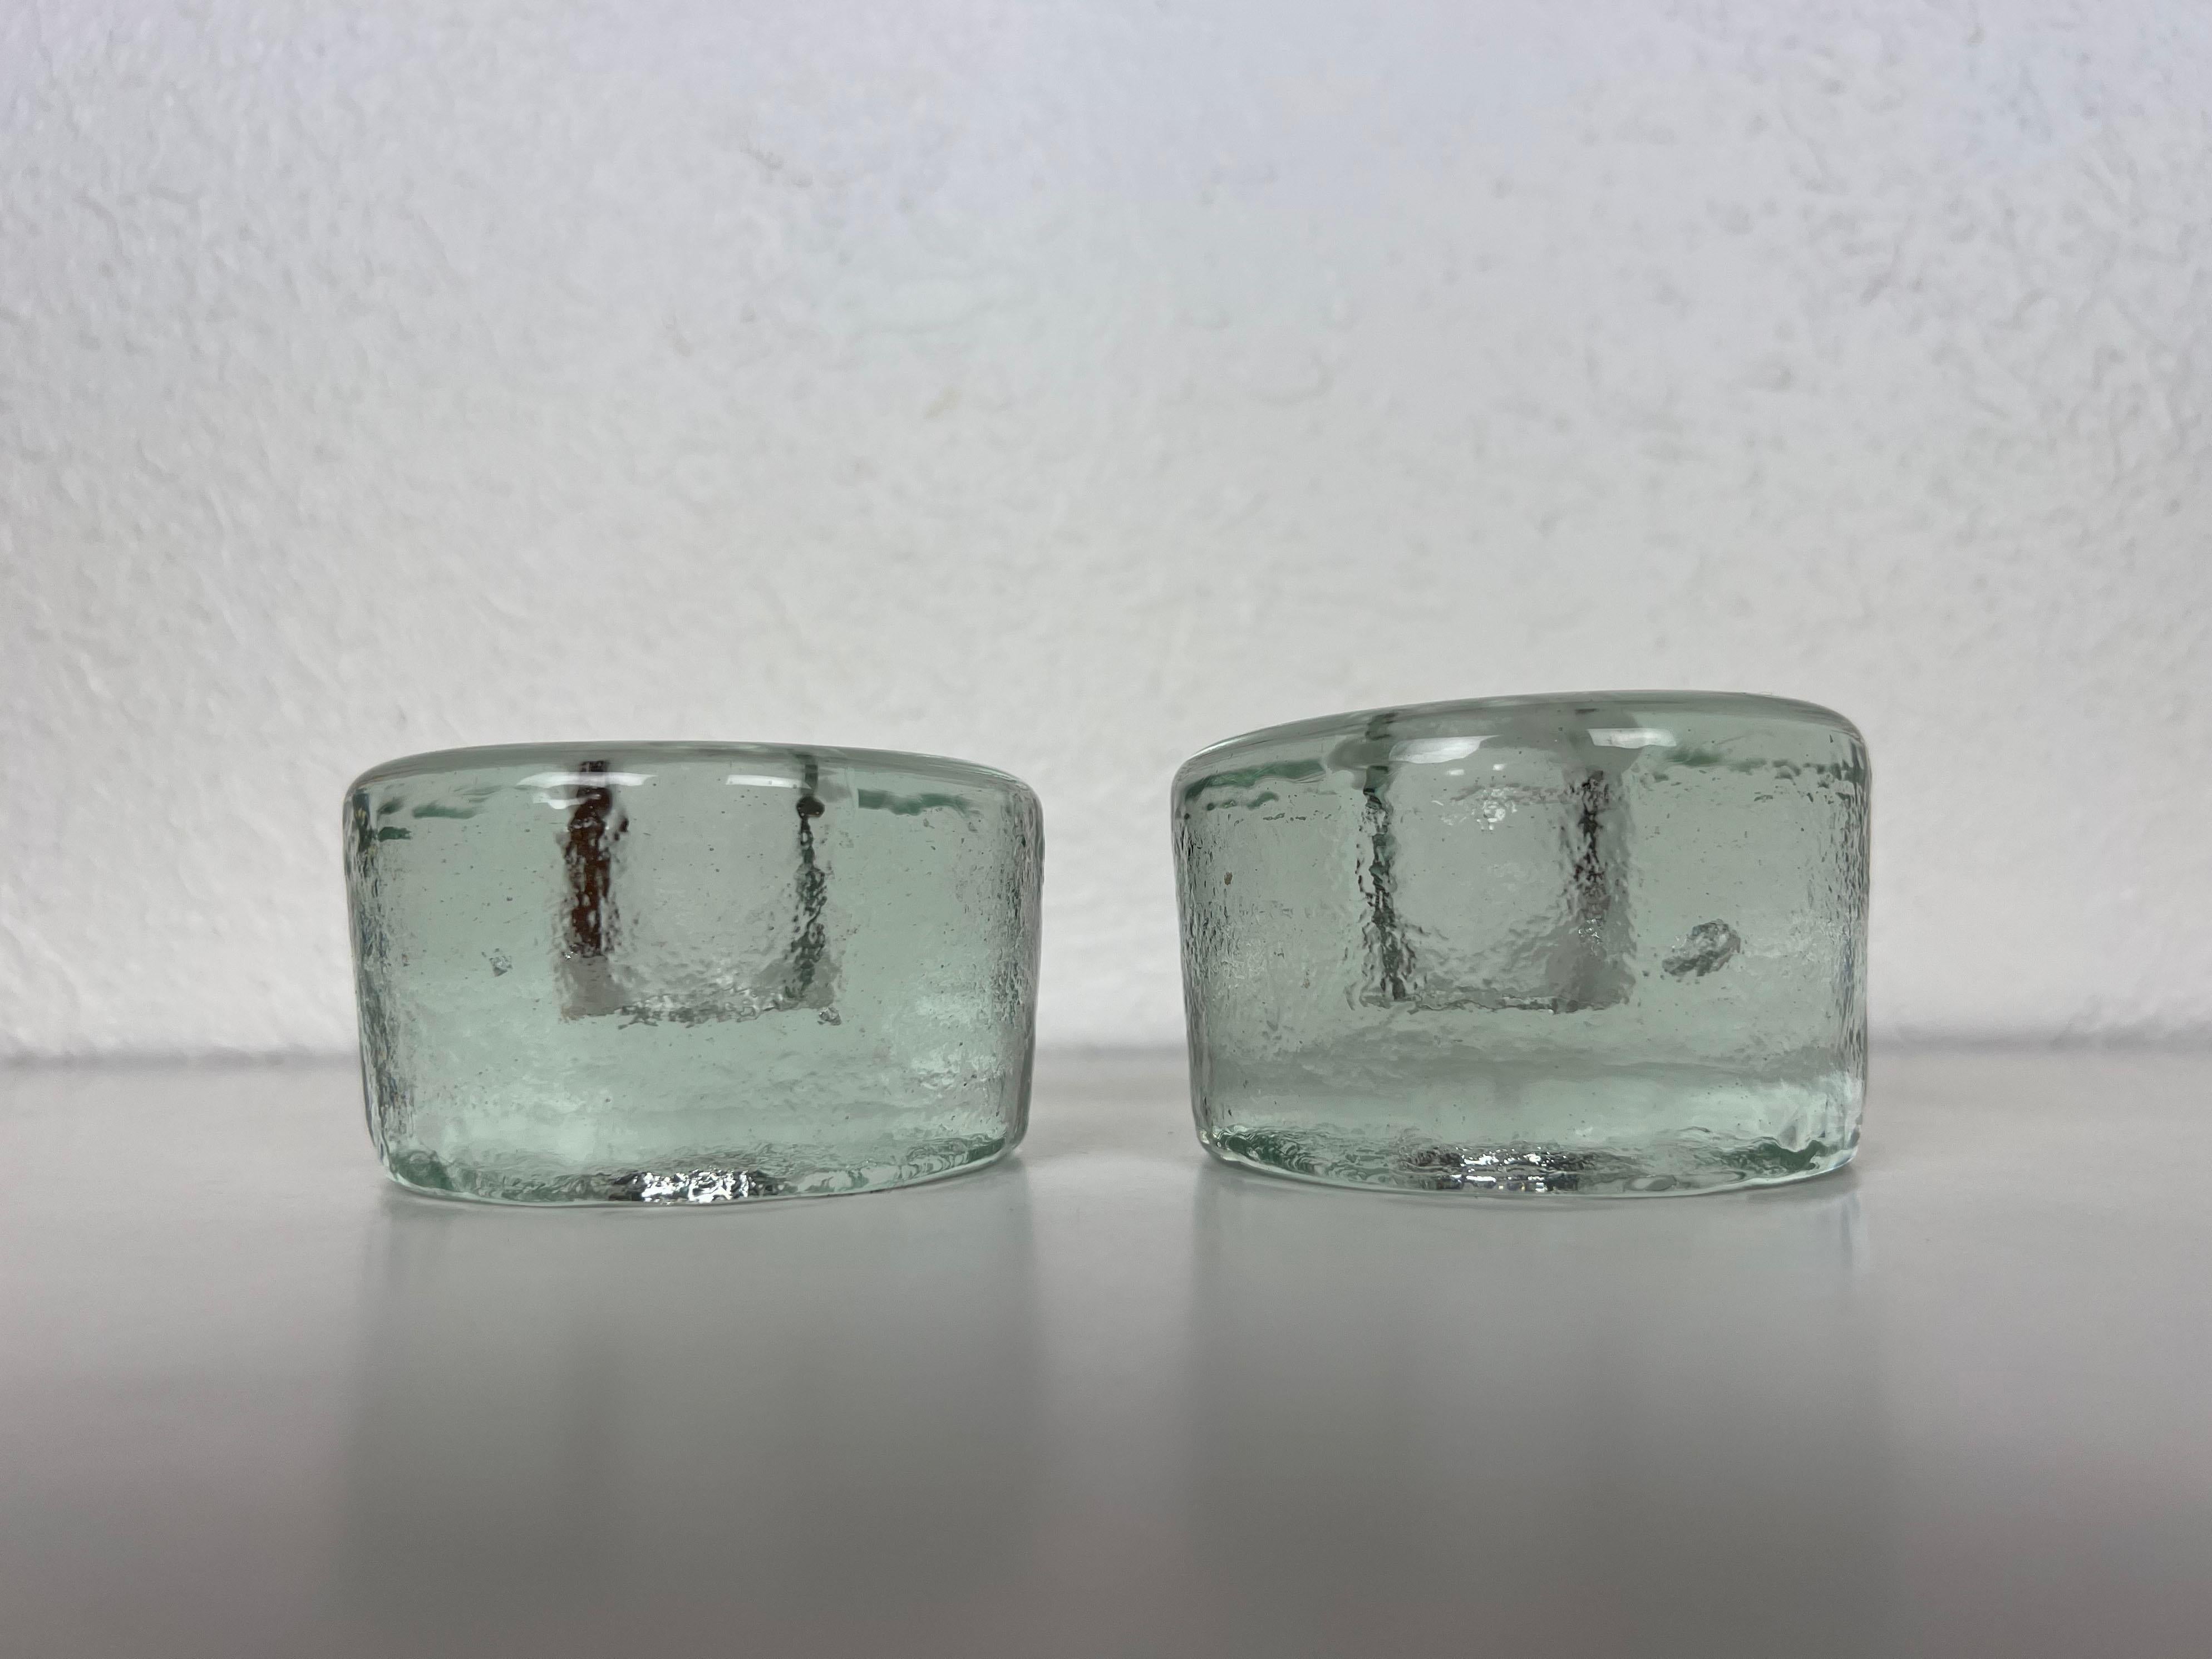 Vintage pair of puck shaped glass candleholders by Blenko. Handmade from solid glass, slightly different in size.

Manufacurer: Blenko

Origin: USA

Year: 1960s

Syle: Mid-Century Modern

Dimensions: 3.25